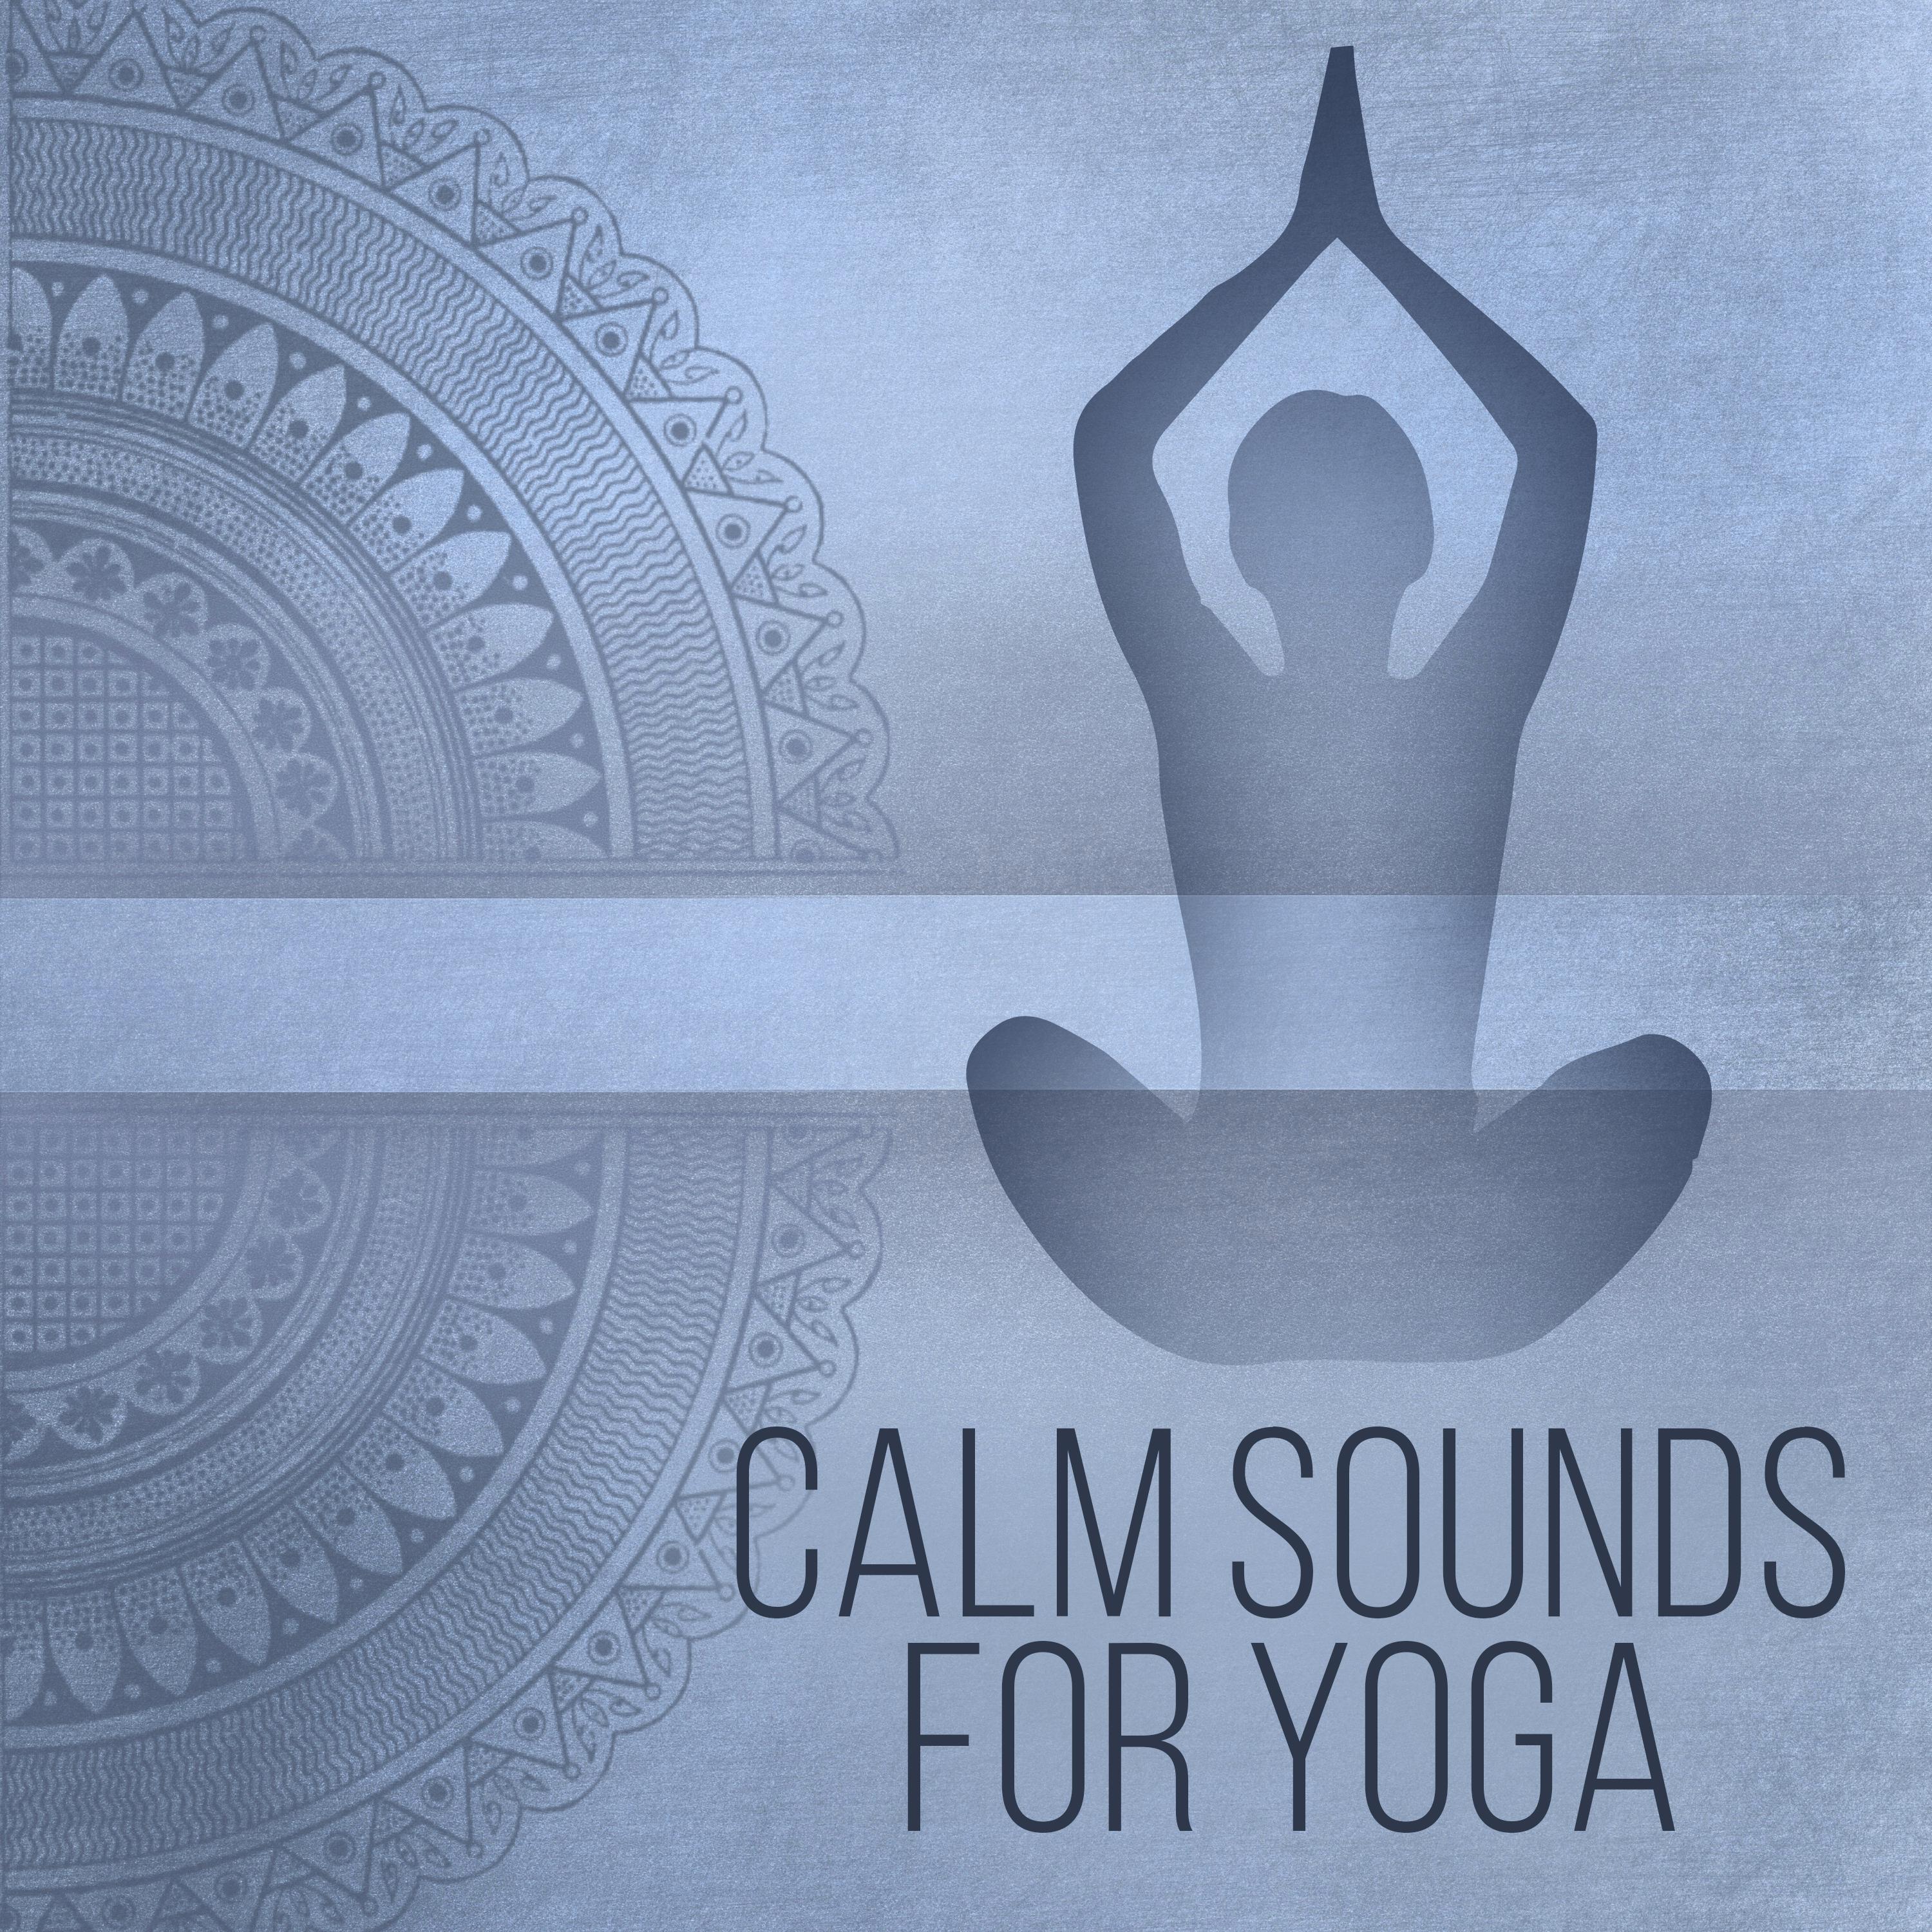 Calm Sounds for Yoga  Soft Music to Relax, Meditation Sounds to Rest, Yoga Training, Chakra Gathering, Buddha Lounge